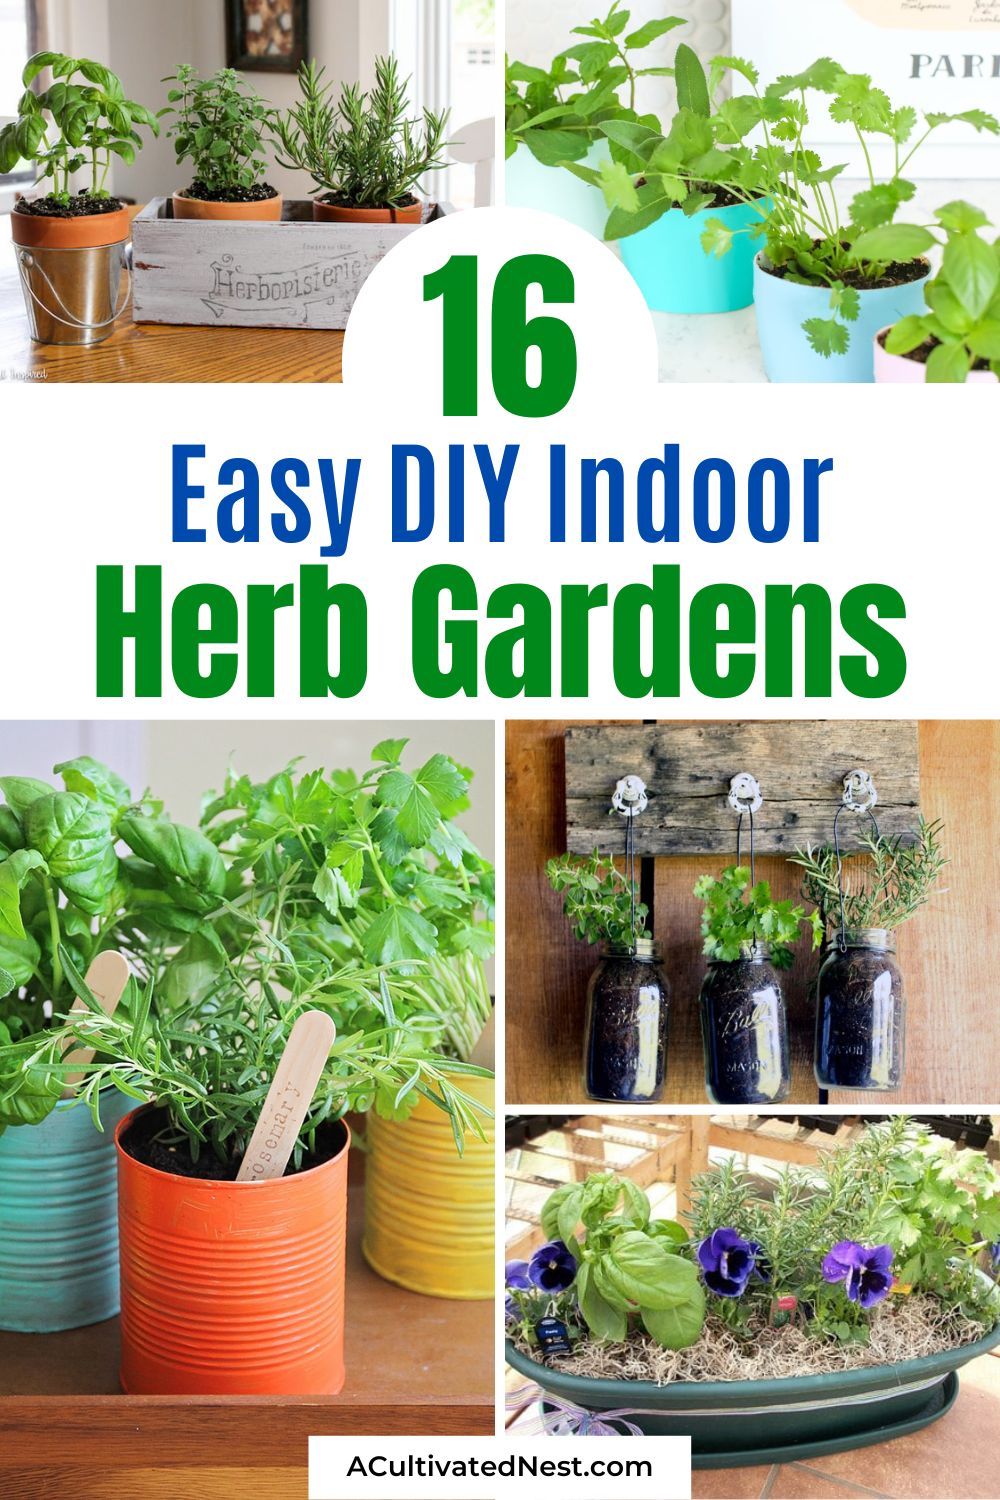 16 Clever Indoor Herb Garden DIY Ideas- Transform your space into a culinary haven with these inventive indoor herb garden DIY ideas! Grow your favorite herbs year-round and elevate your dishes with homegrown freshness. | #indoorGardening #herbs #garden #diyProjects #ACultivatedNest